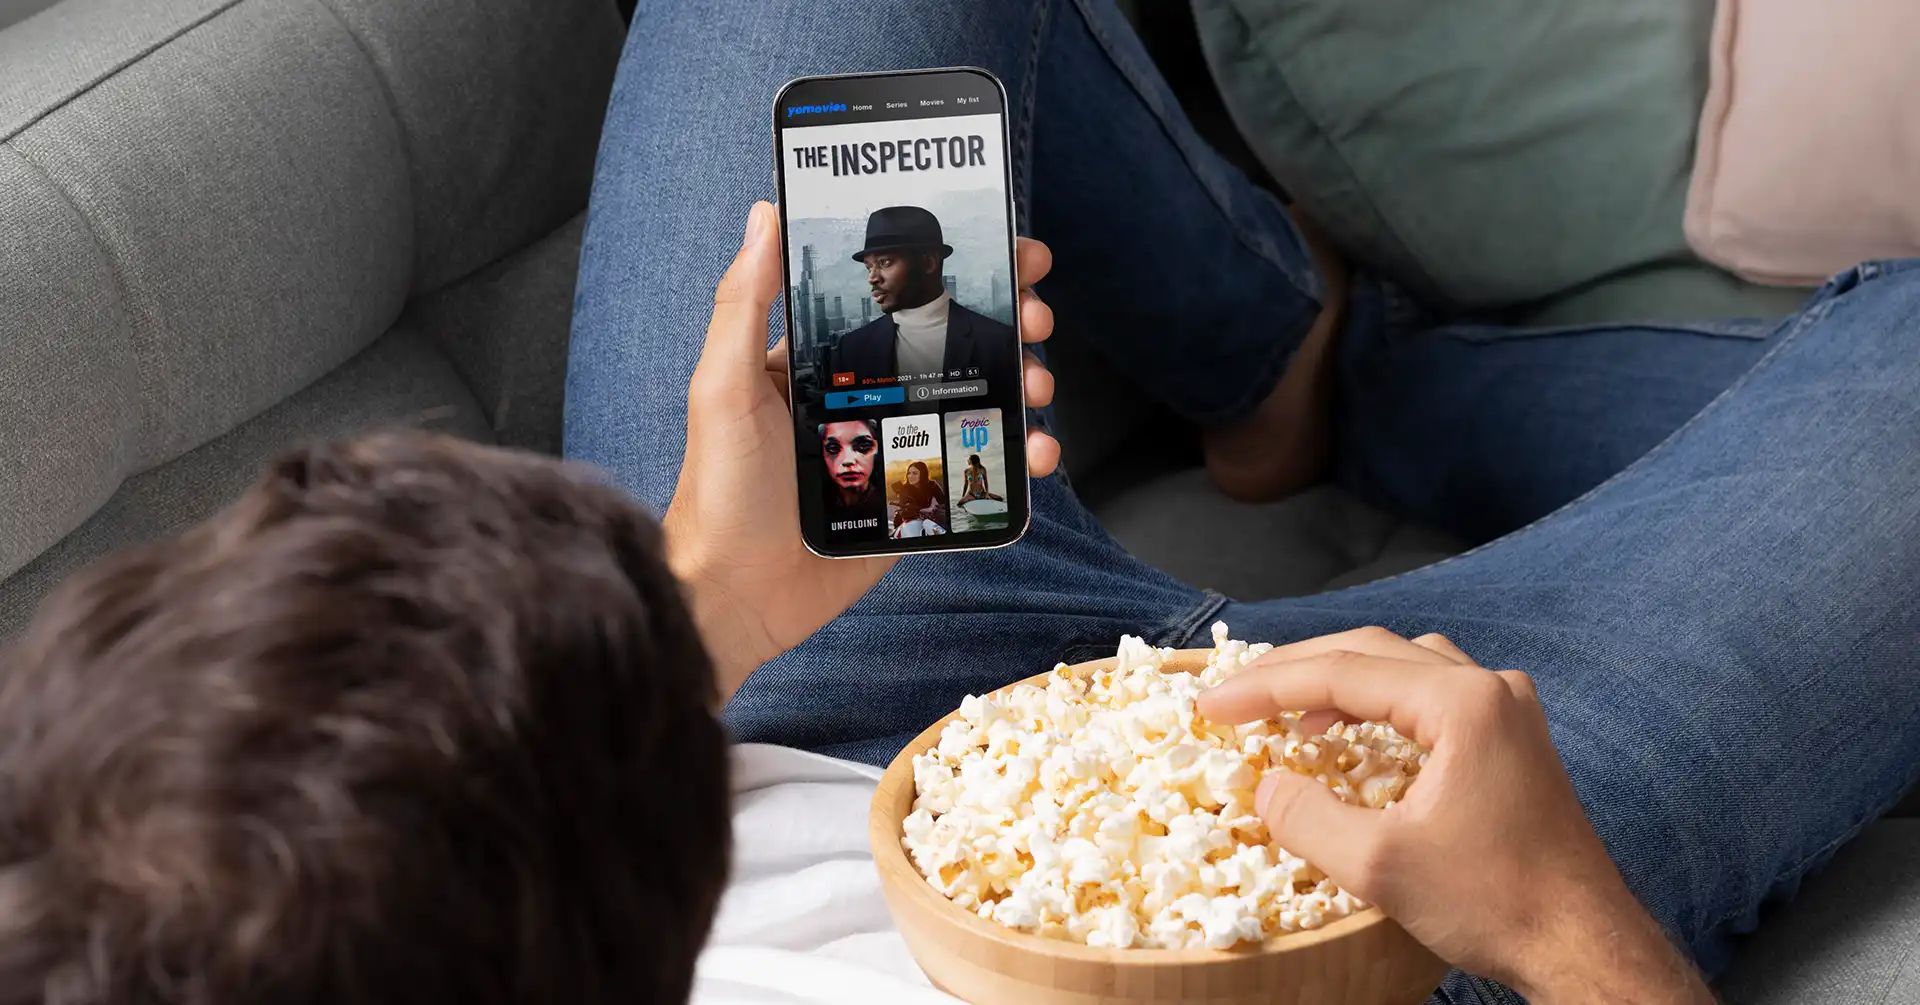 Yomovies: A Free Online Platform for Movie Enthusiasts